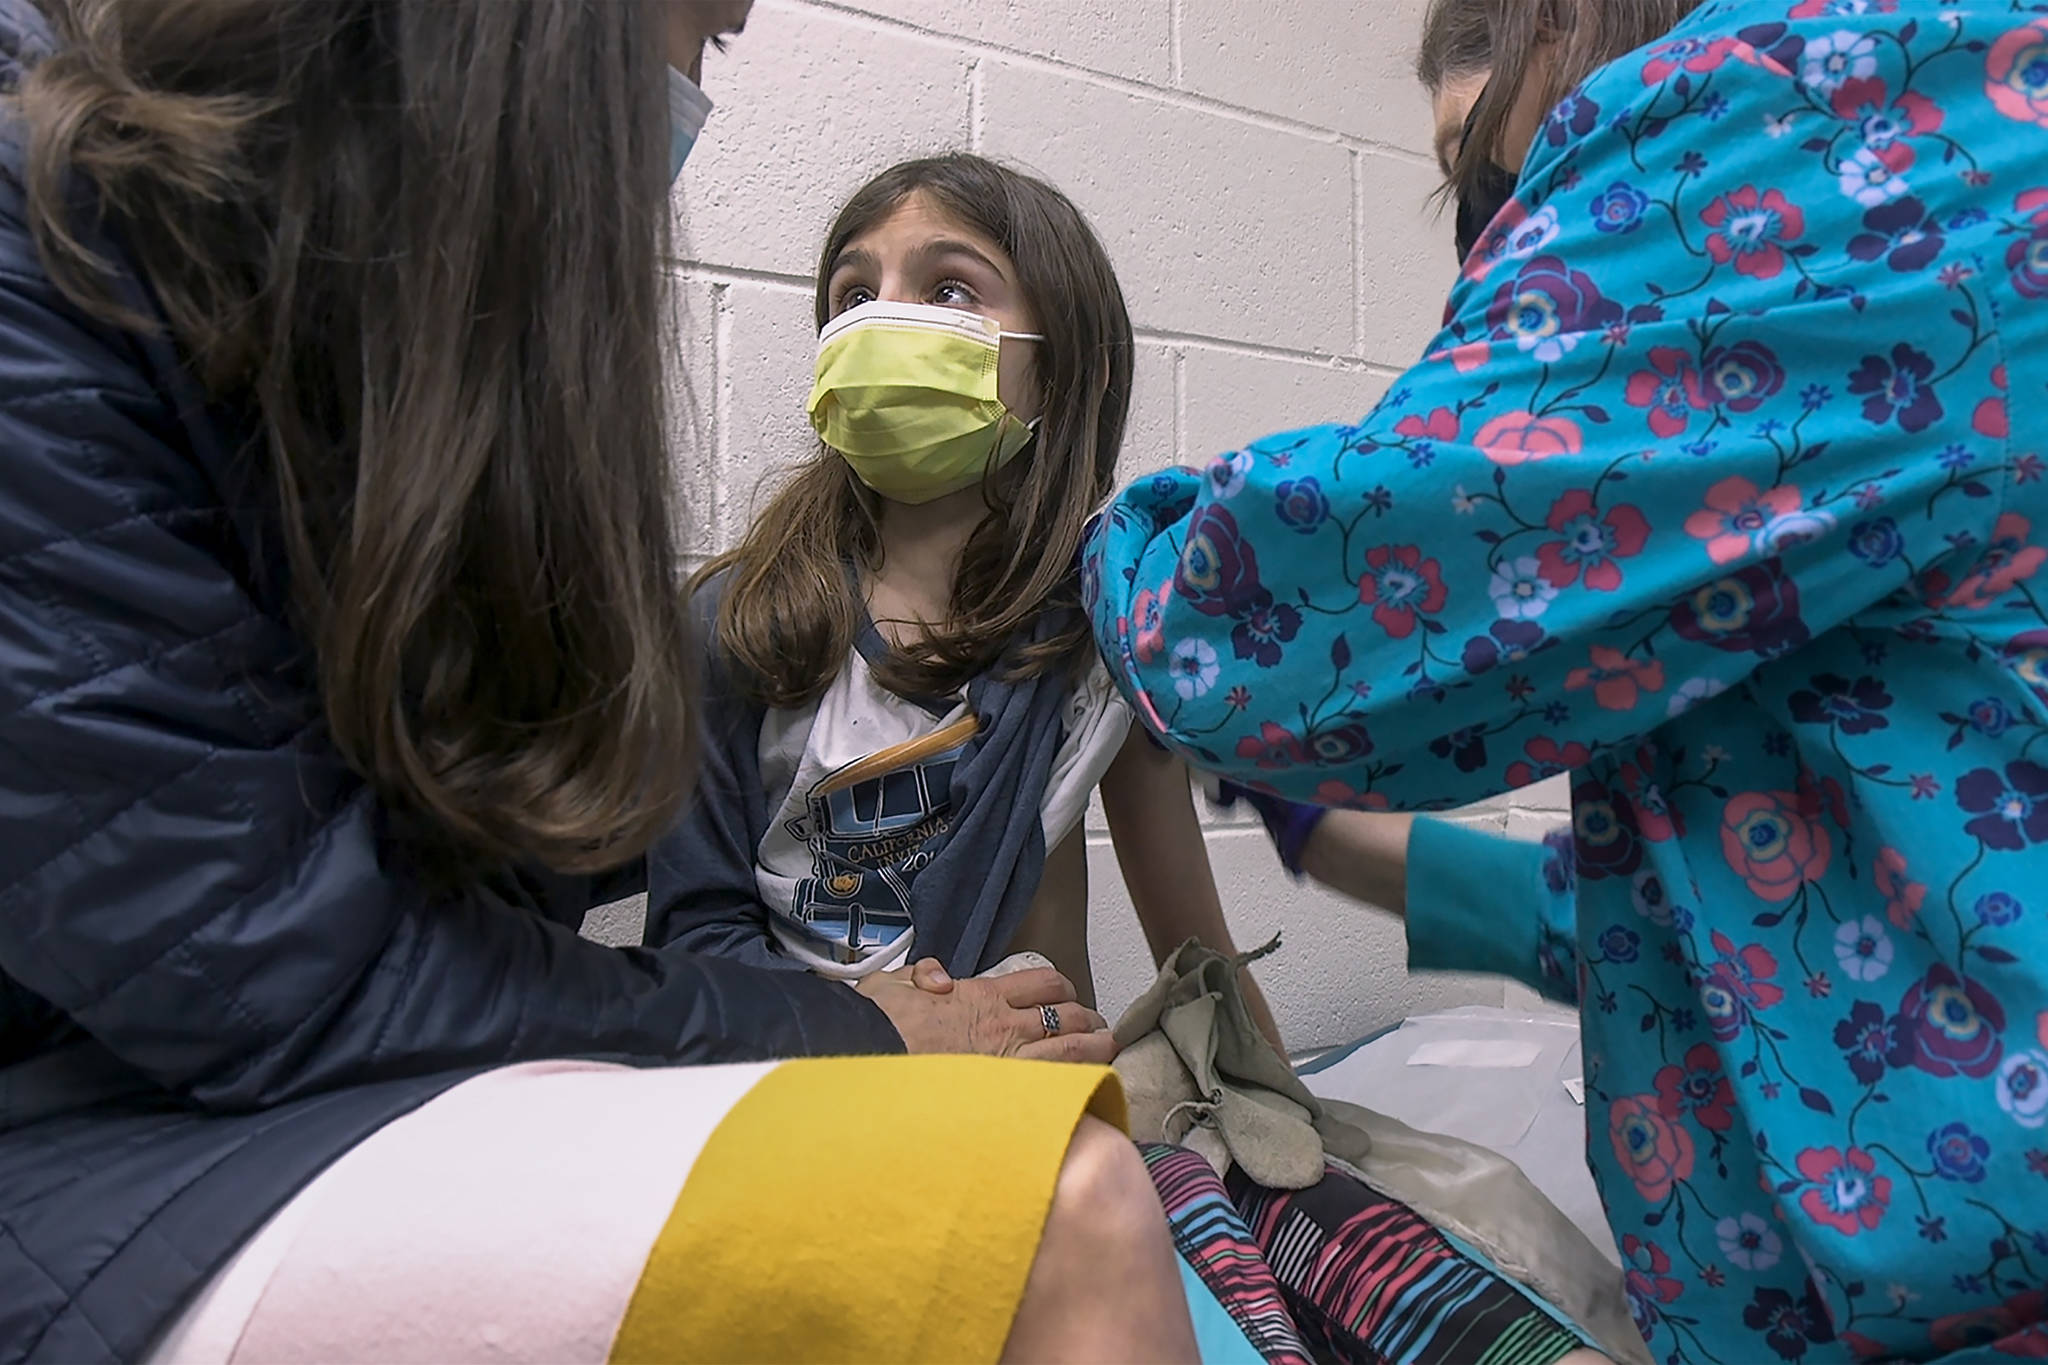 In this Wednesday, March 24, 2021 image from video provided by Duke Health, Alejandra Gerardo, 9, looks up to her mom, Dr. Susanna Naggie, as she gets the first of two Pfizer COVID-19 vaccinations during a clinical trial for children at Duke Health in Durham, N.C. In the U.S. and abroad, researchers are beginning to test younger and younger kids, to make sure the shots are safe and work for each age. (Shawn Rocco / Duke Health)